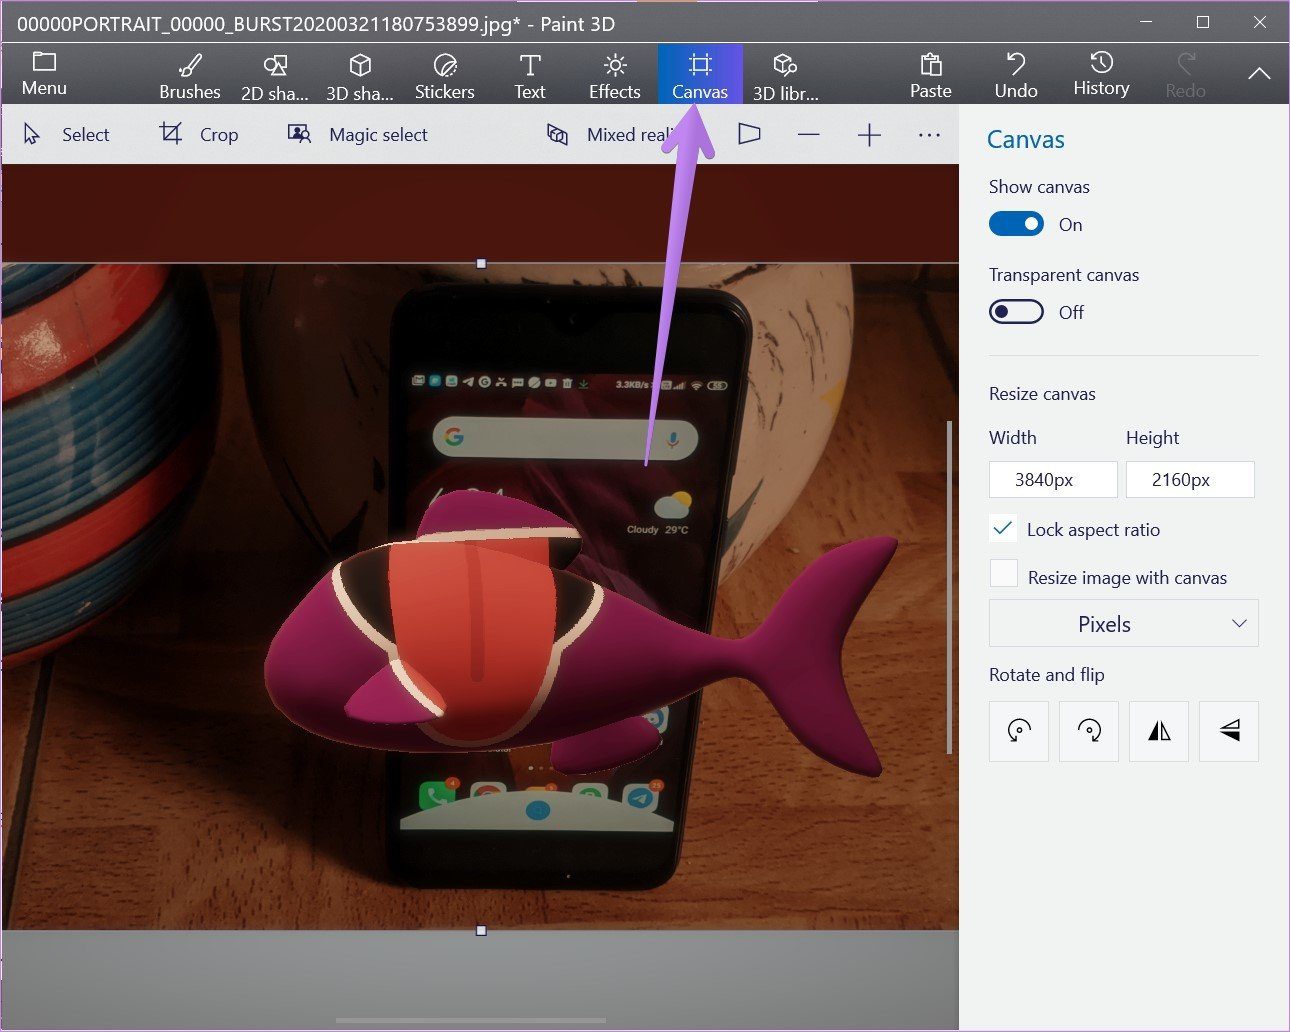 How to use paint 3d to edit photos 20